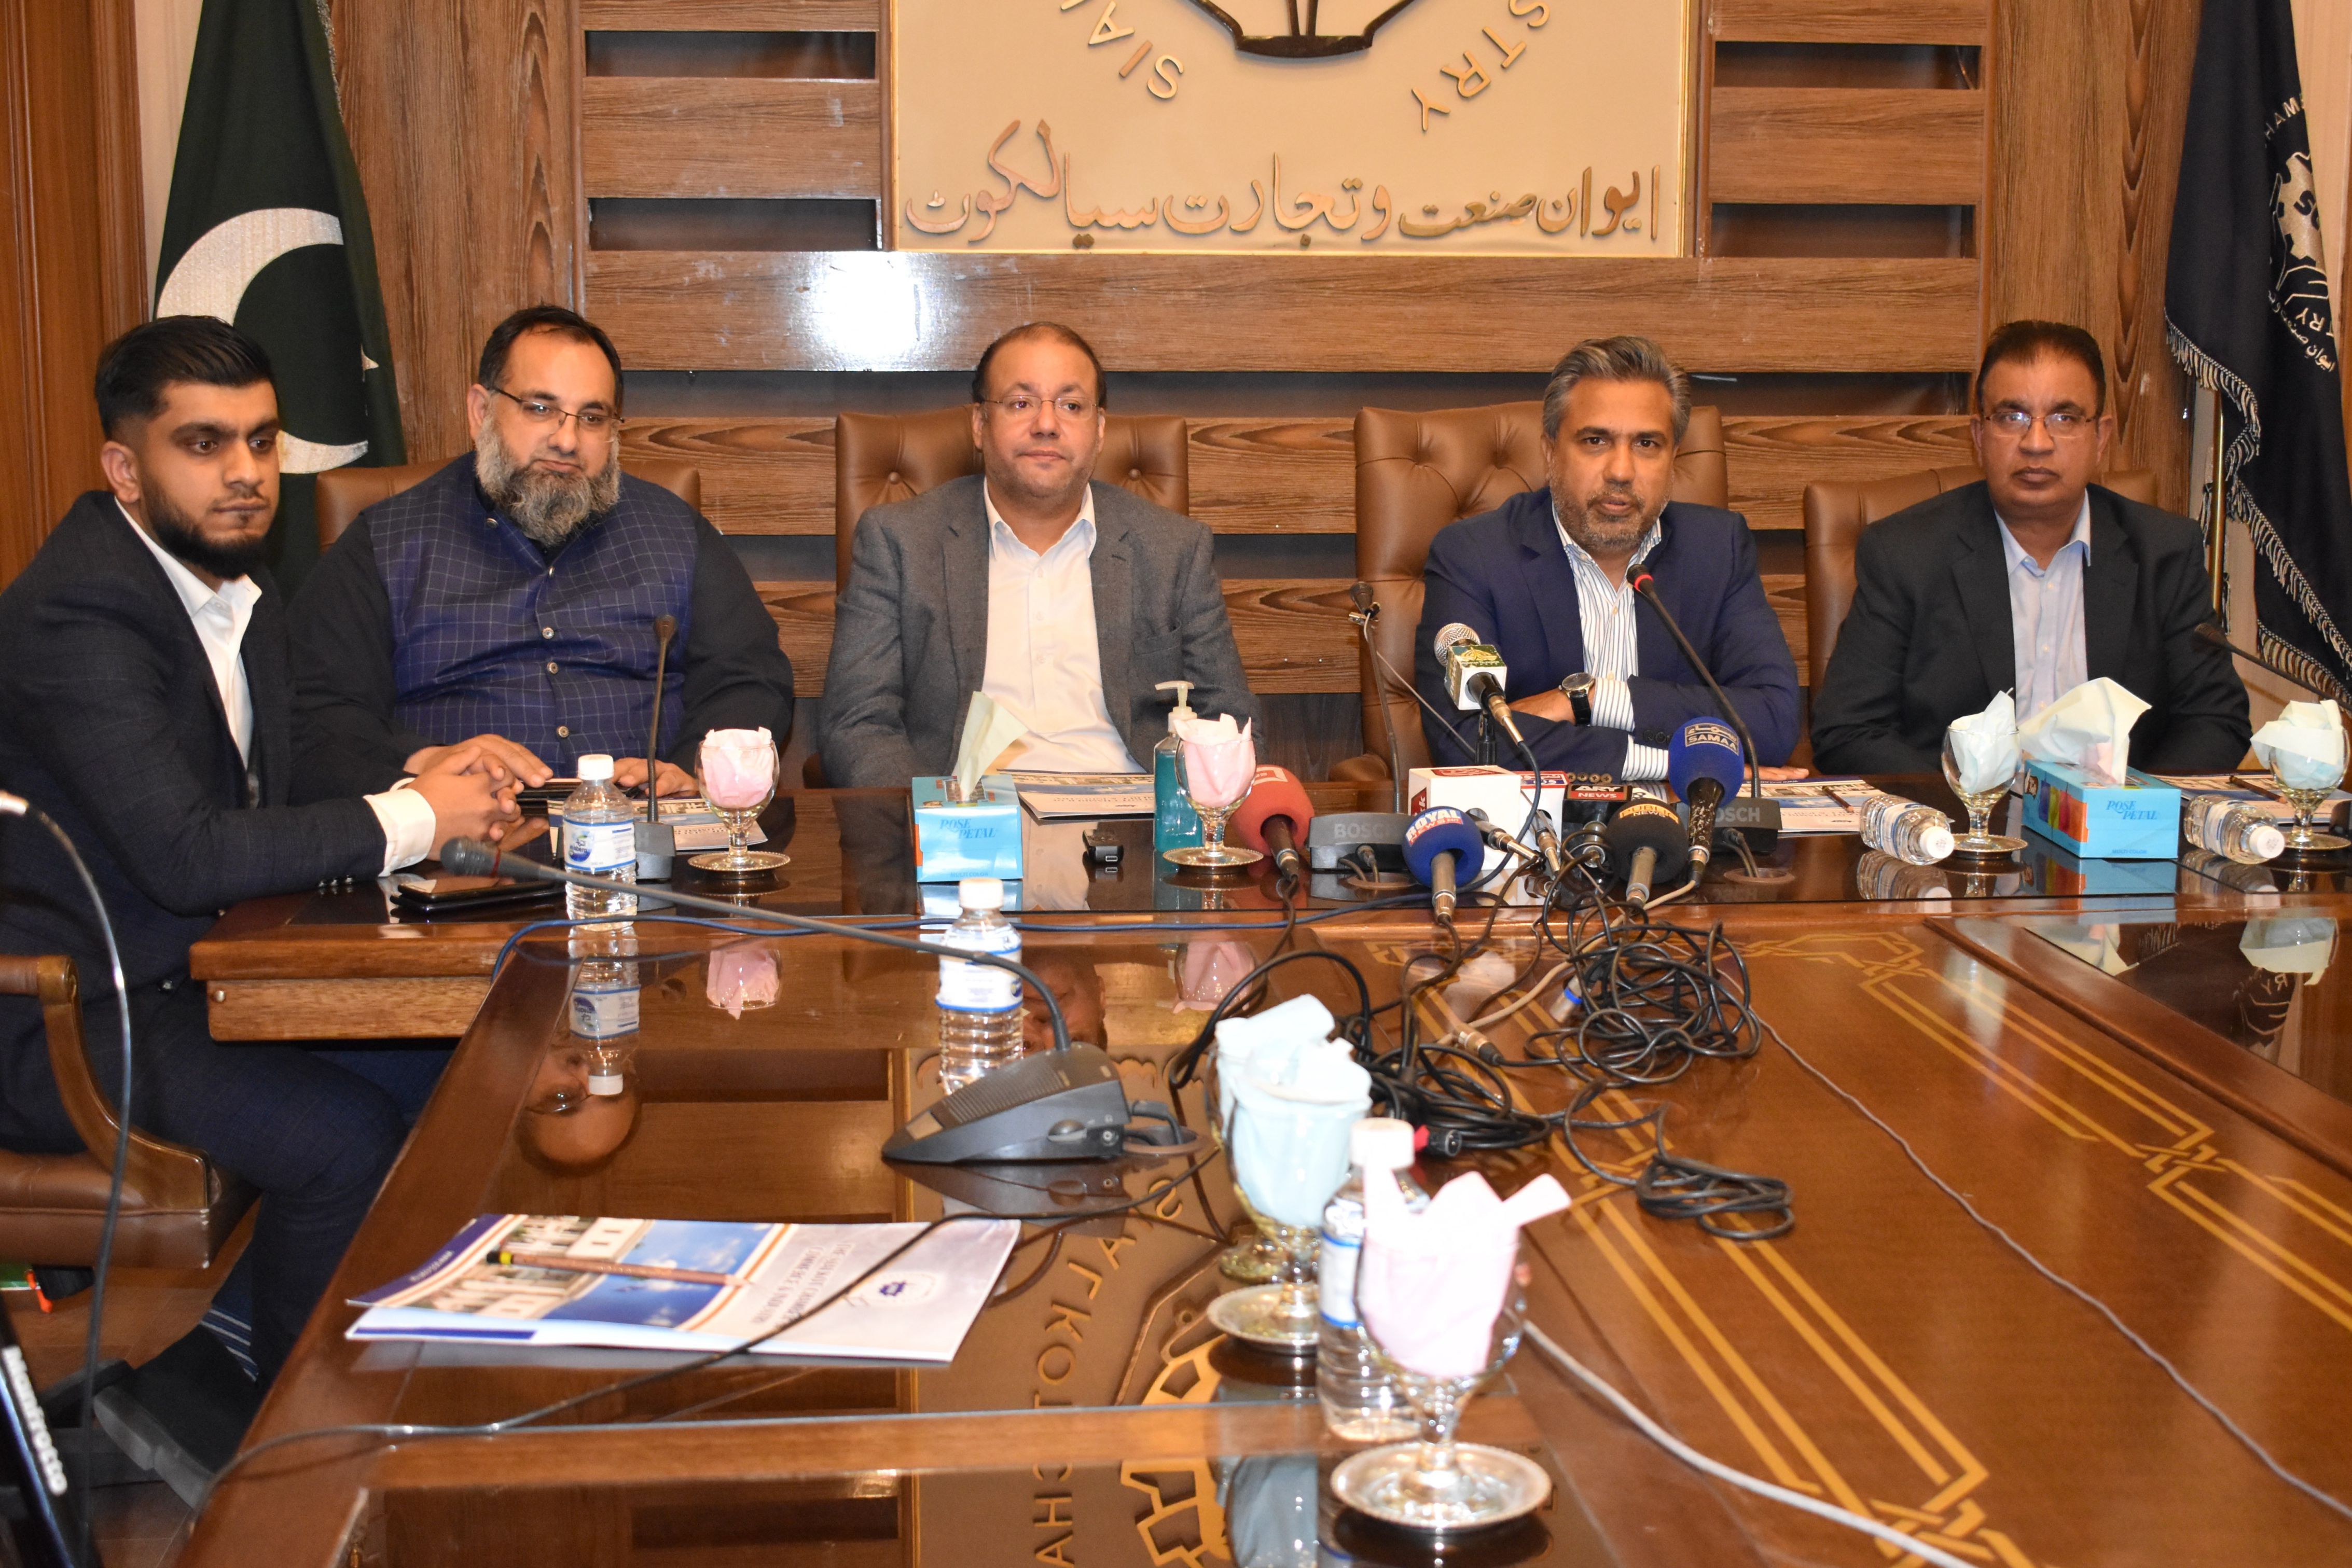 On March 2, 2021, an MOU signing ceremony of SCCI with Lalaa Ji Technologies Pvt Ltd was arranged, wherein Mr. Qaisar Iqbal Baryar, President SCCI, welcomed Chaudhry Shafay Hussain and endorsed the efforts of Lalaa Ji for promoting a Pakistani based E-Commerce platform that would help the members of SCCI in promoting “Made in Sialkot” through the said portal.  During the interaction with the members, Mr. Ali Shafiq, CEO Lalaa Ji, announced that the company would offer free Gold membership to the members of SCCI for the year 2021, and would also help them in developing their digital content and business profiles on Lalaaji.com.